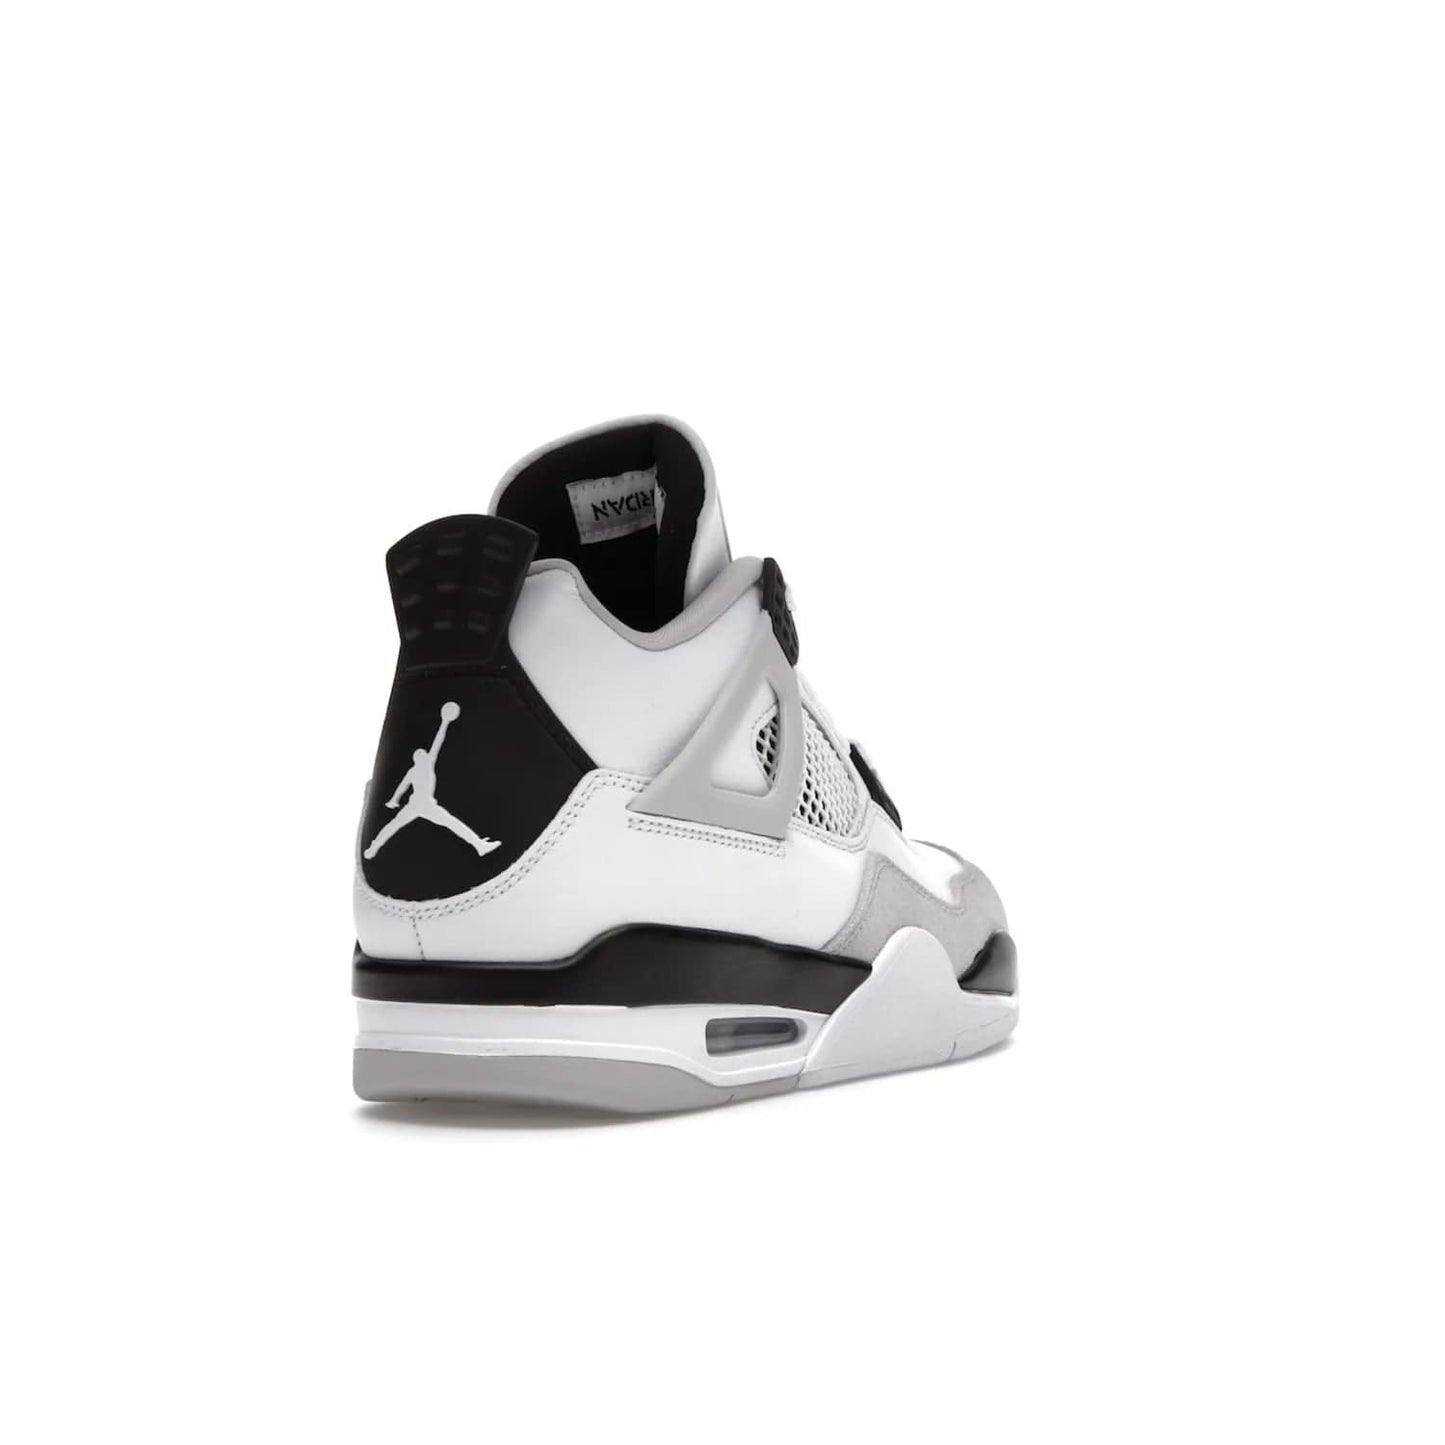 Jordan 4 Retro Military Black - Image 31 - Only at www.BallersClubKickz.com - Updated Air Jordan 4 style with a white/black/light grey sole and visible Air unit. Released in May 2022, offering timeless classic style and comfort.